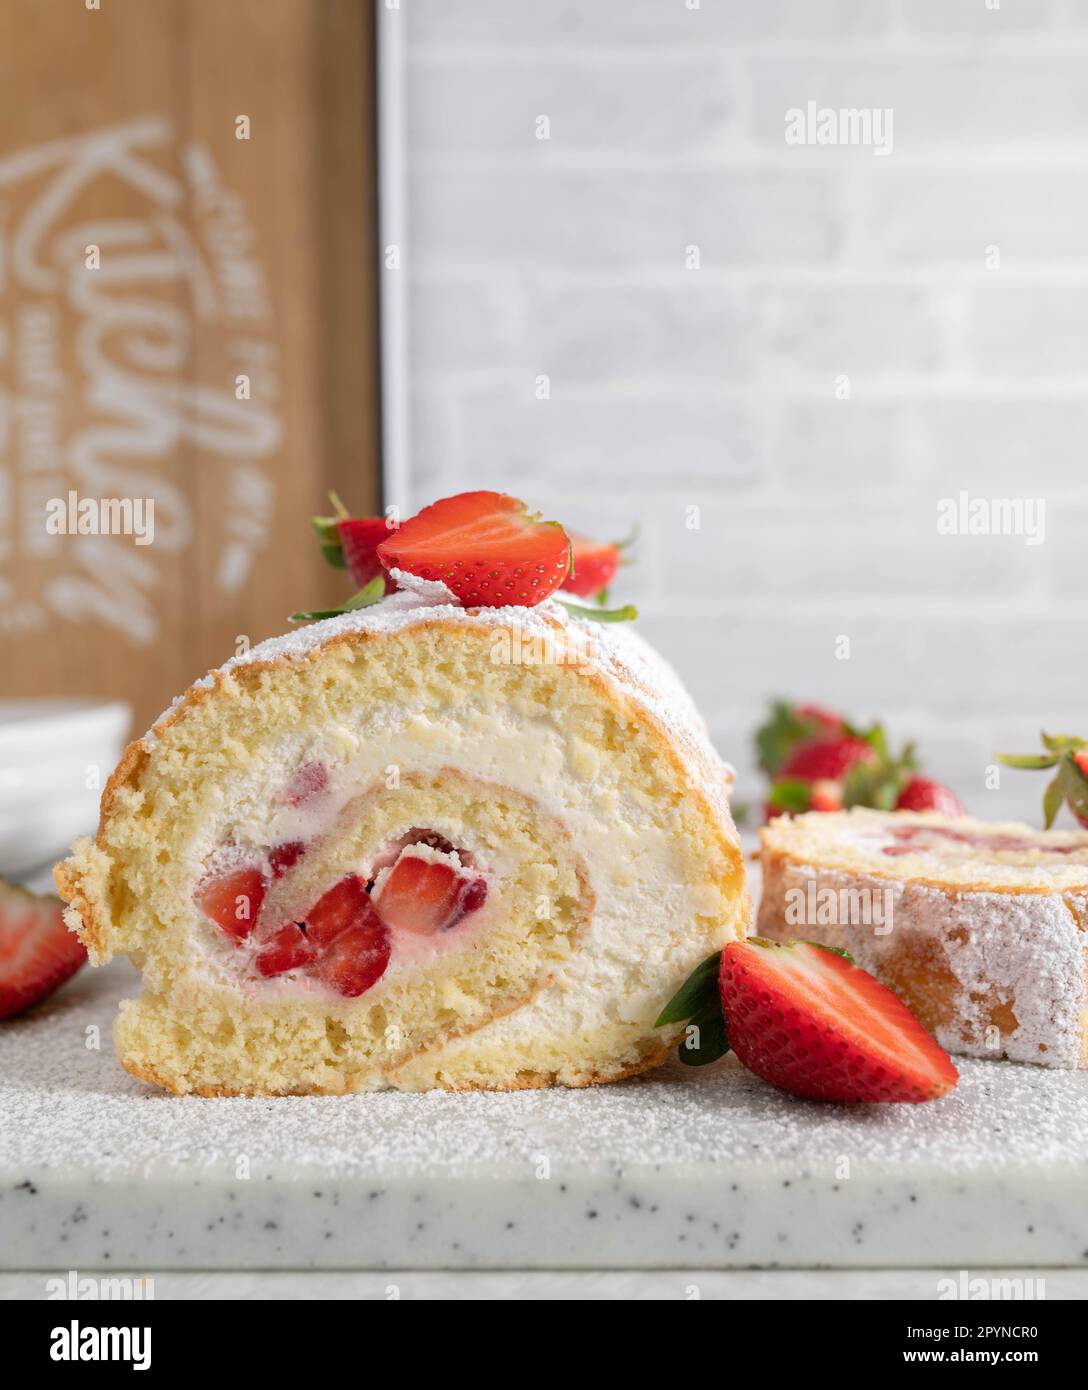 Summer Strawberry dessert with fresh baked swiss roll filled with whipped cream and marinated strawberries. Served on white kitchen table background Stock Photo